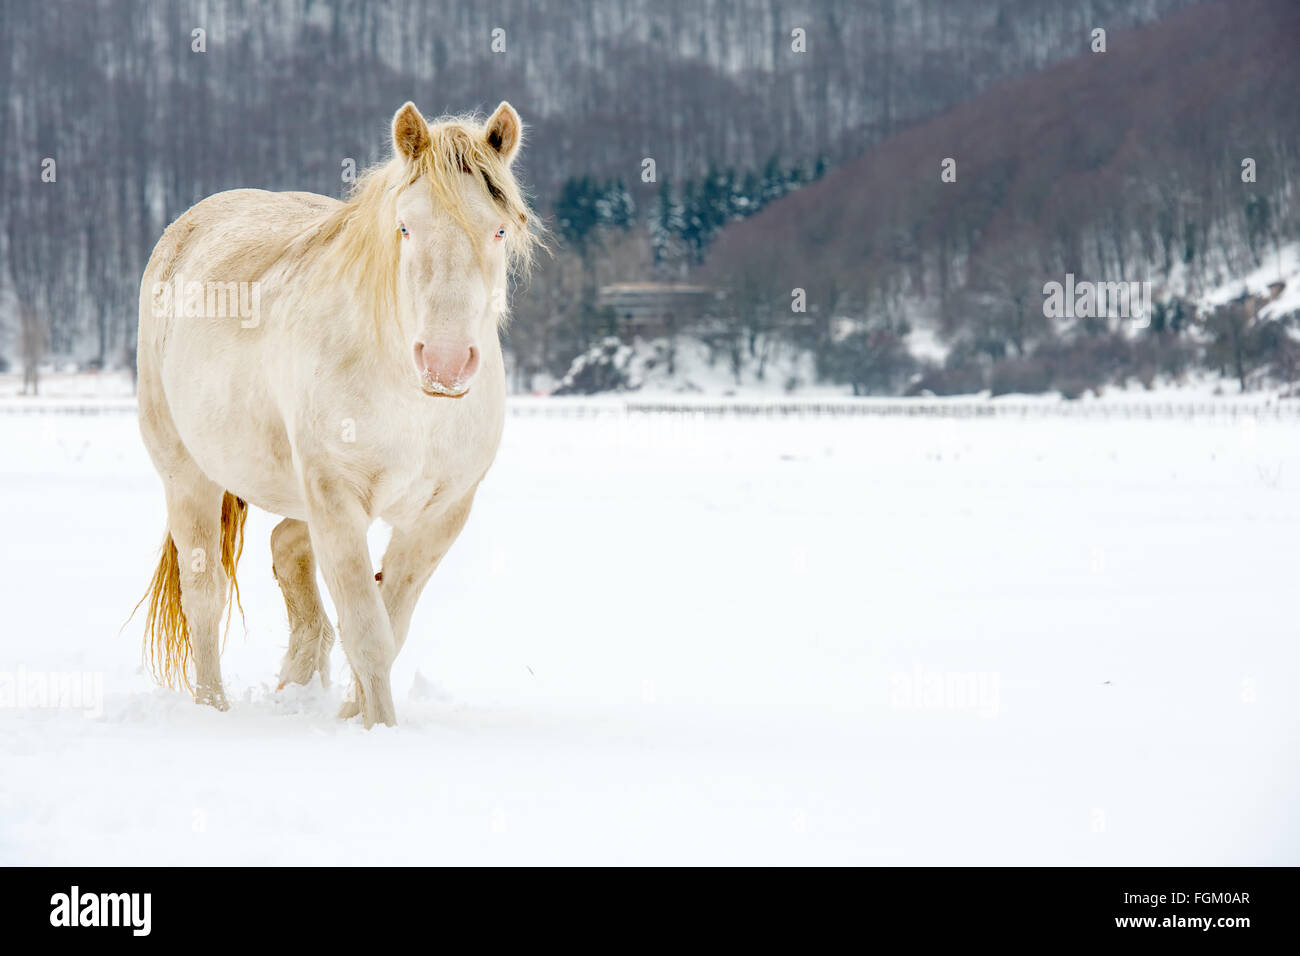 Albino horse with eyes blue on the snow Stock Photo